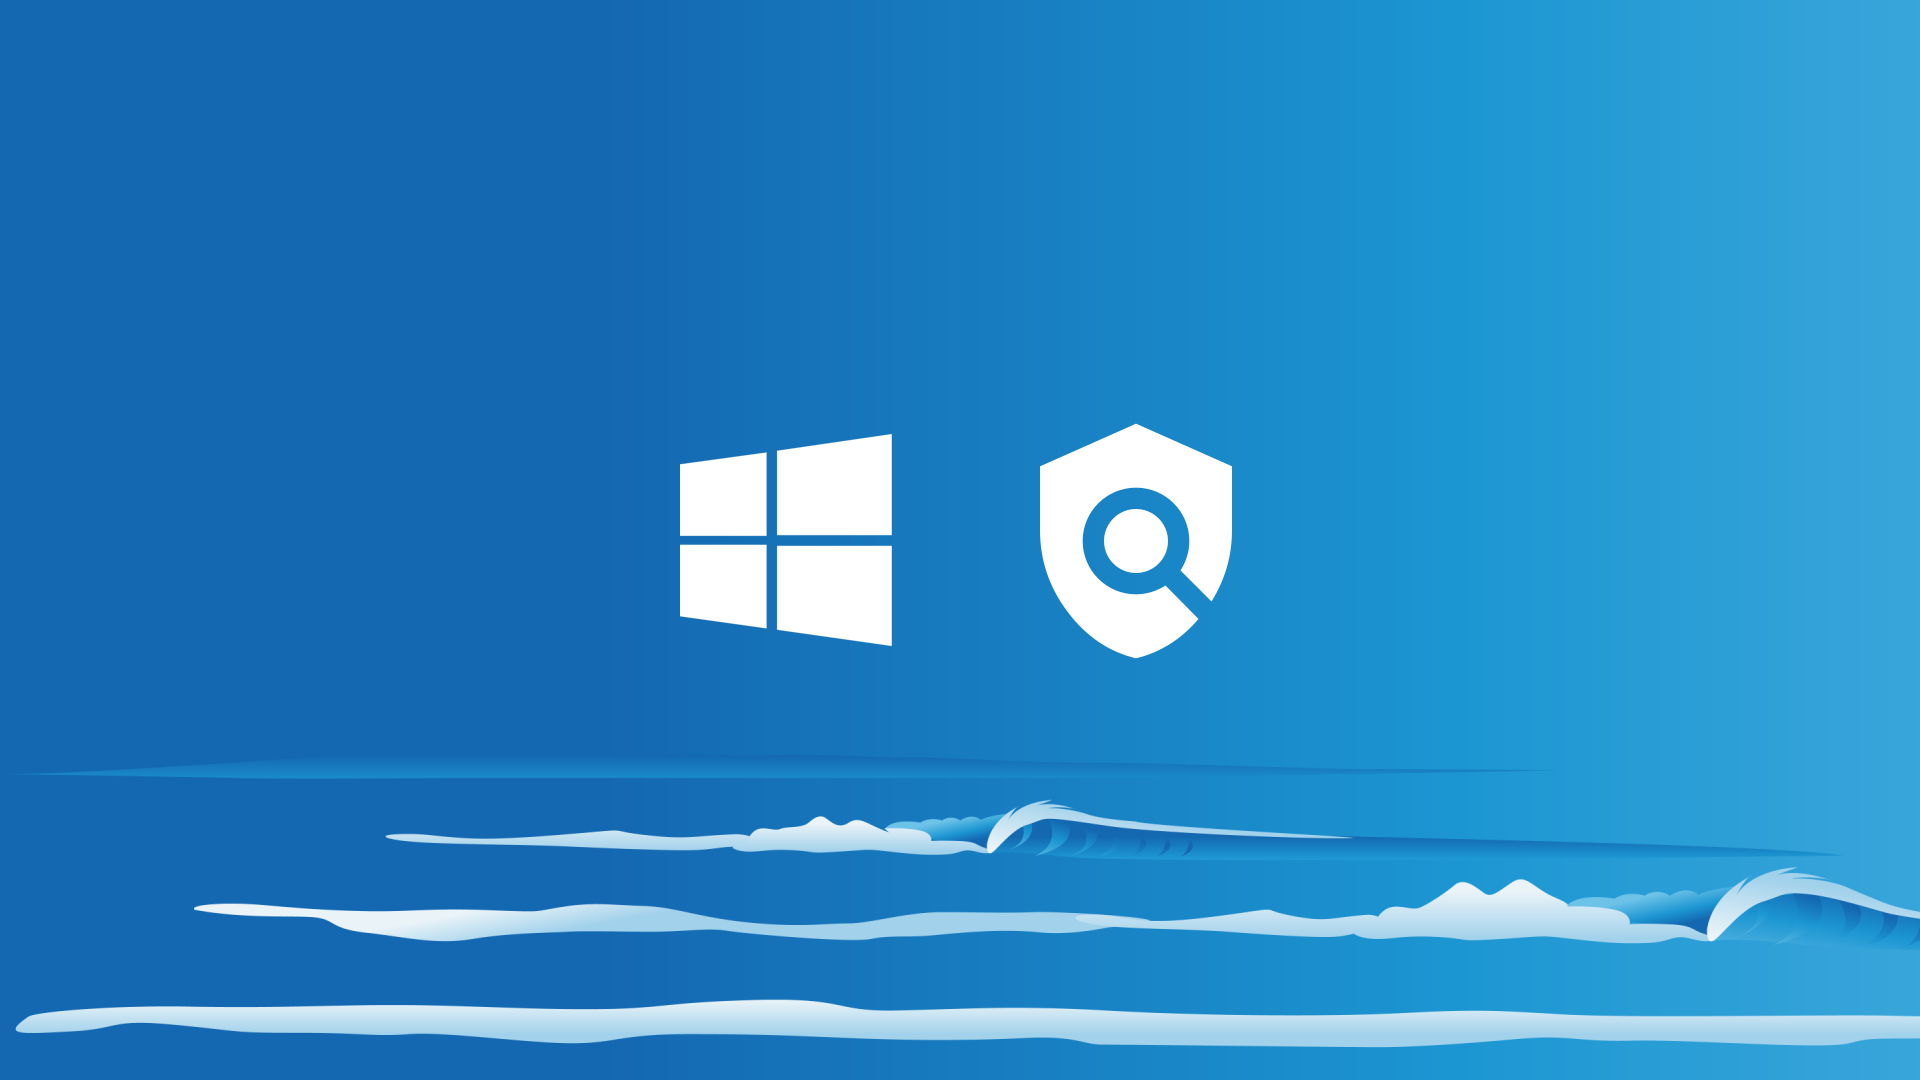 Sea background with Windows 10 icon and router icon